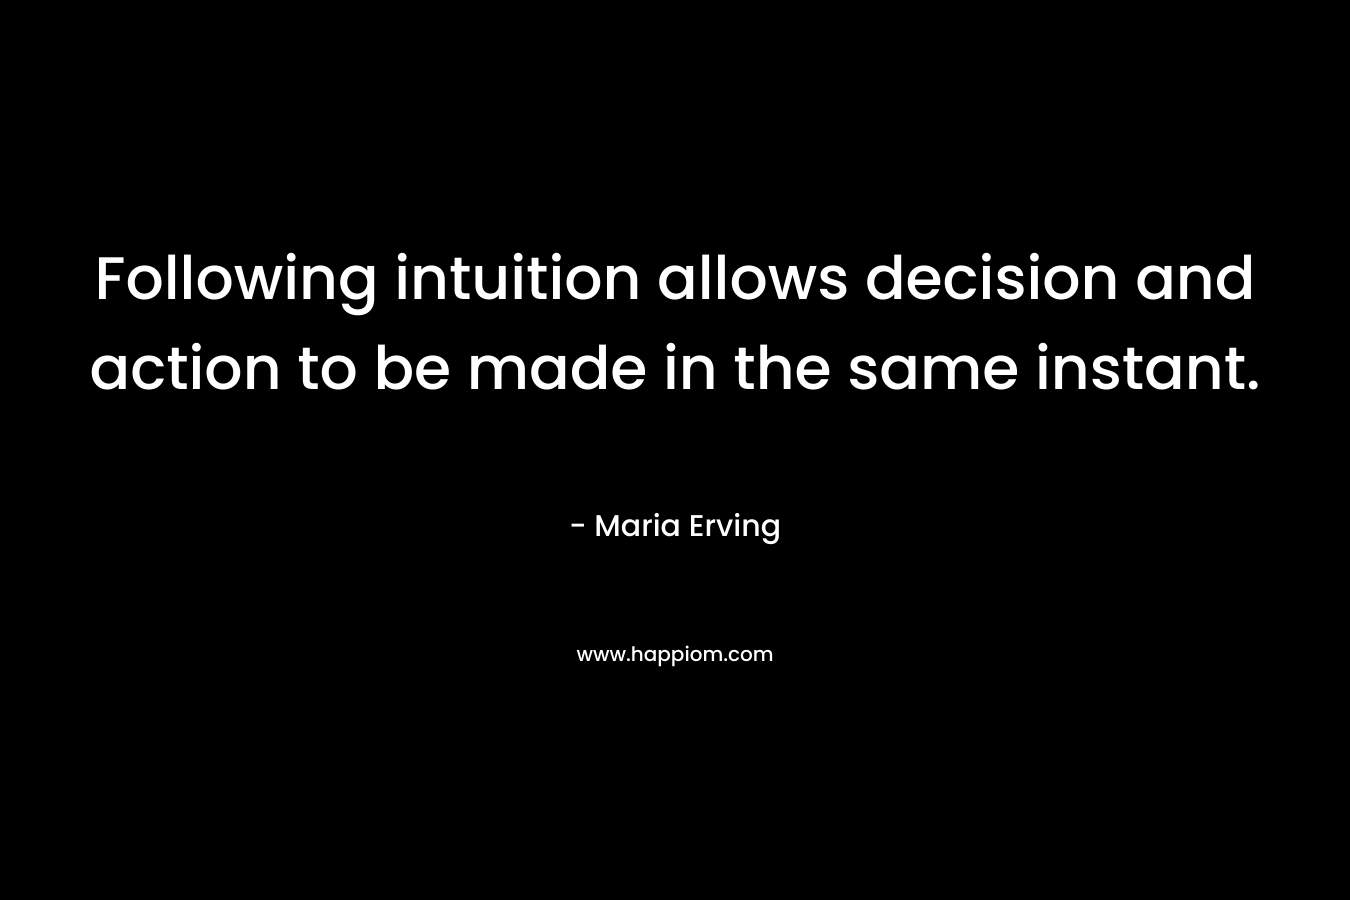 Following intuition allows decision and action to be made in the same instant.